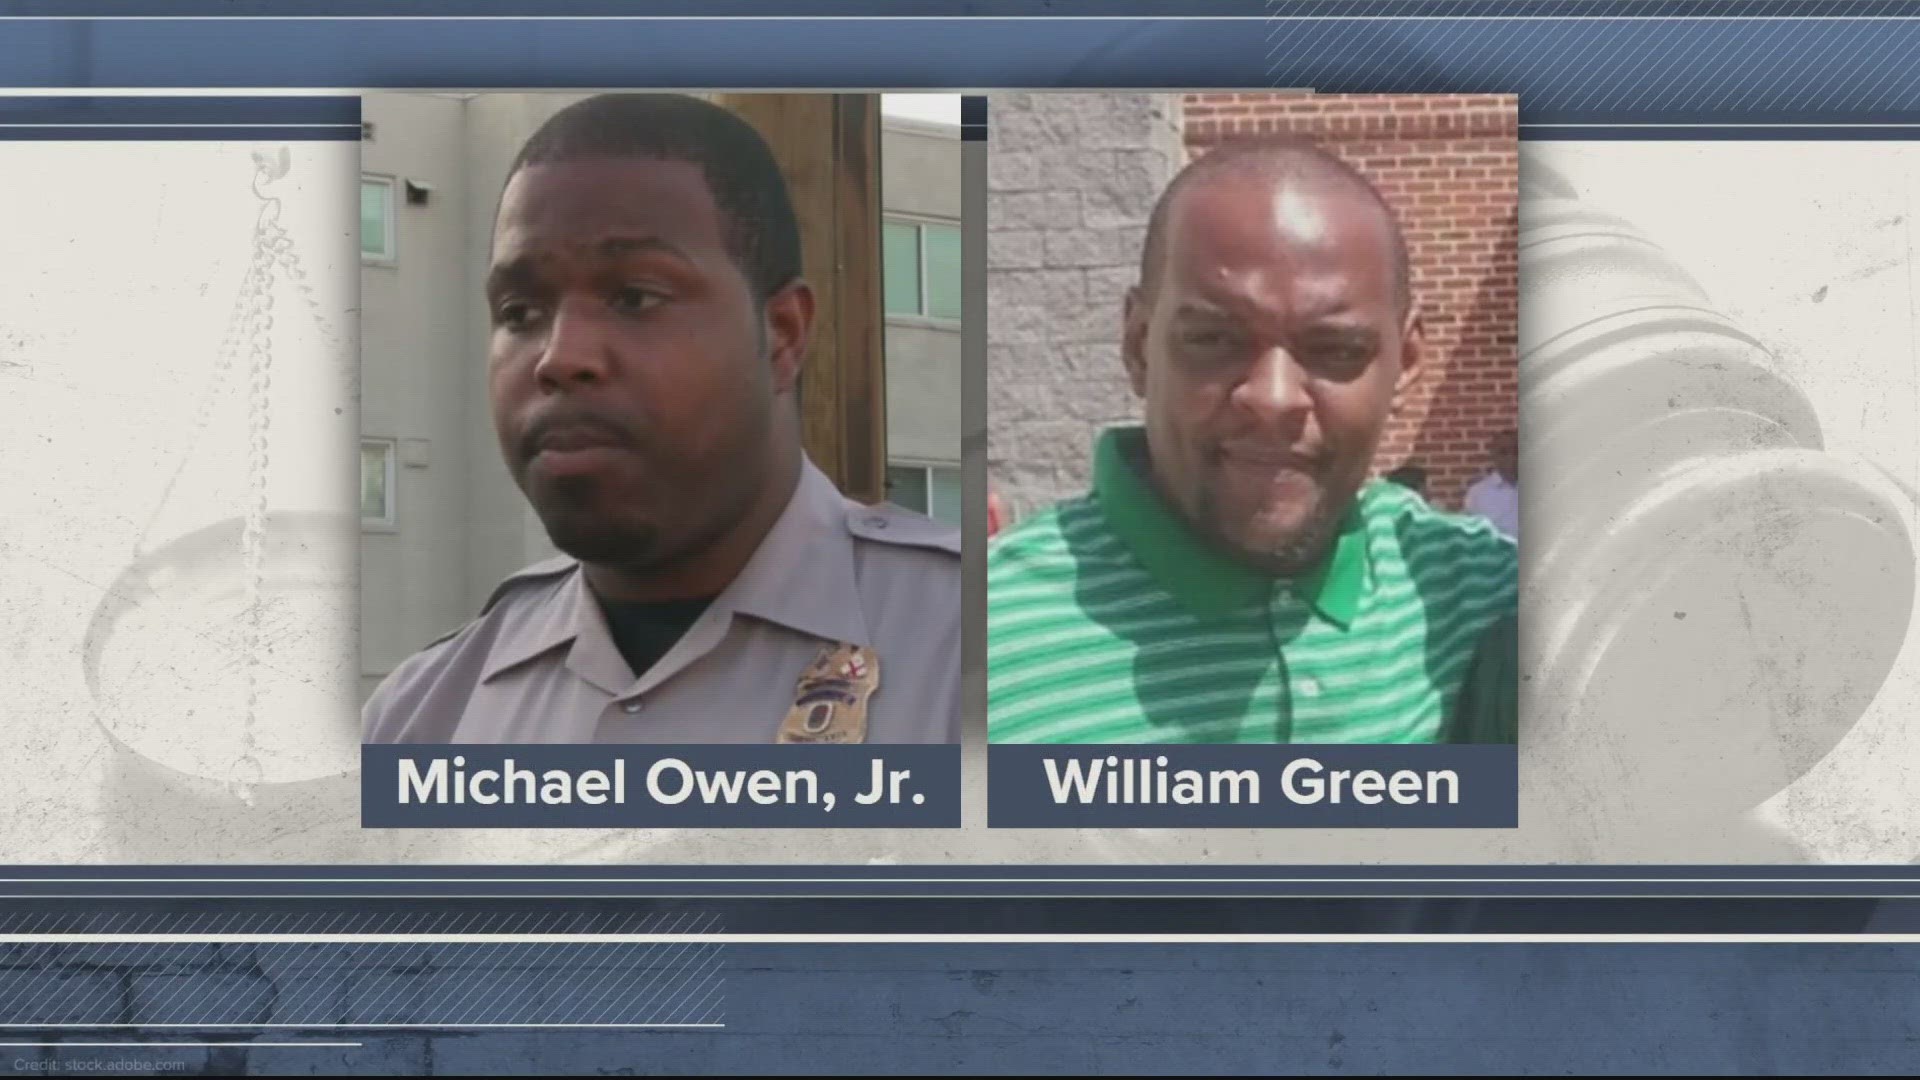 A historic trial in Prince George's County has reached a conclusion, with a jury finding former Cpl. Michael Owen Jr. not guilty of murder charges.